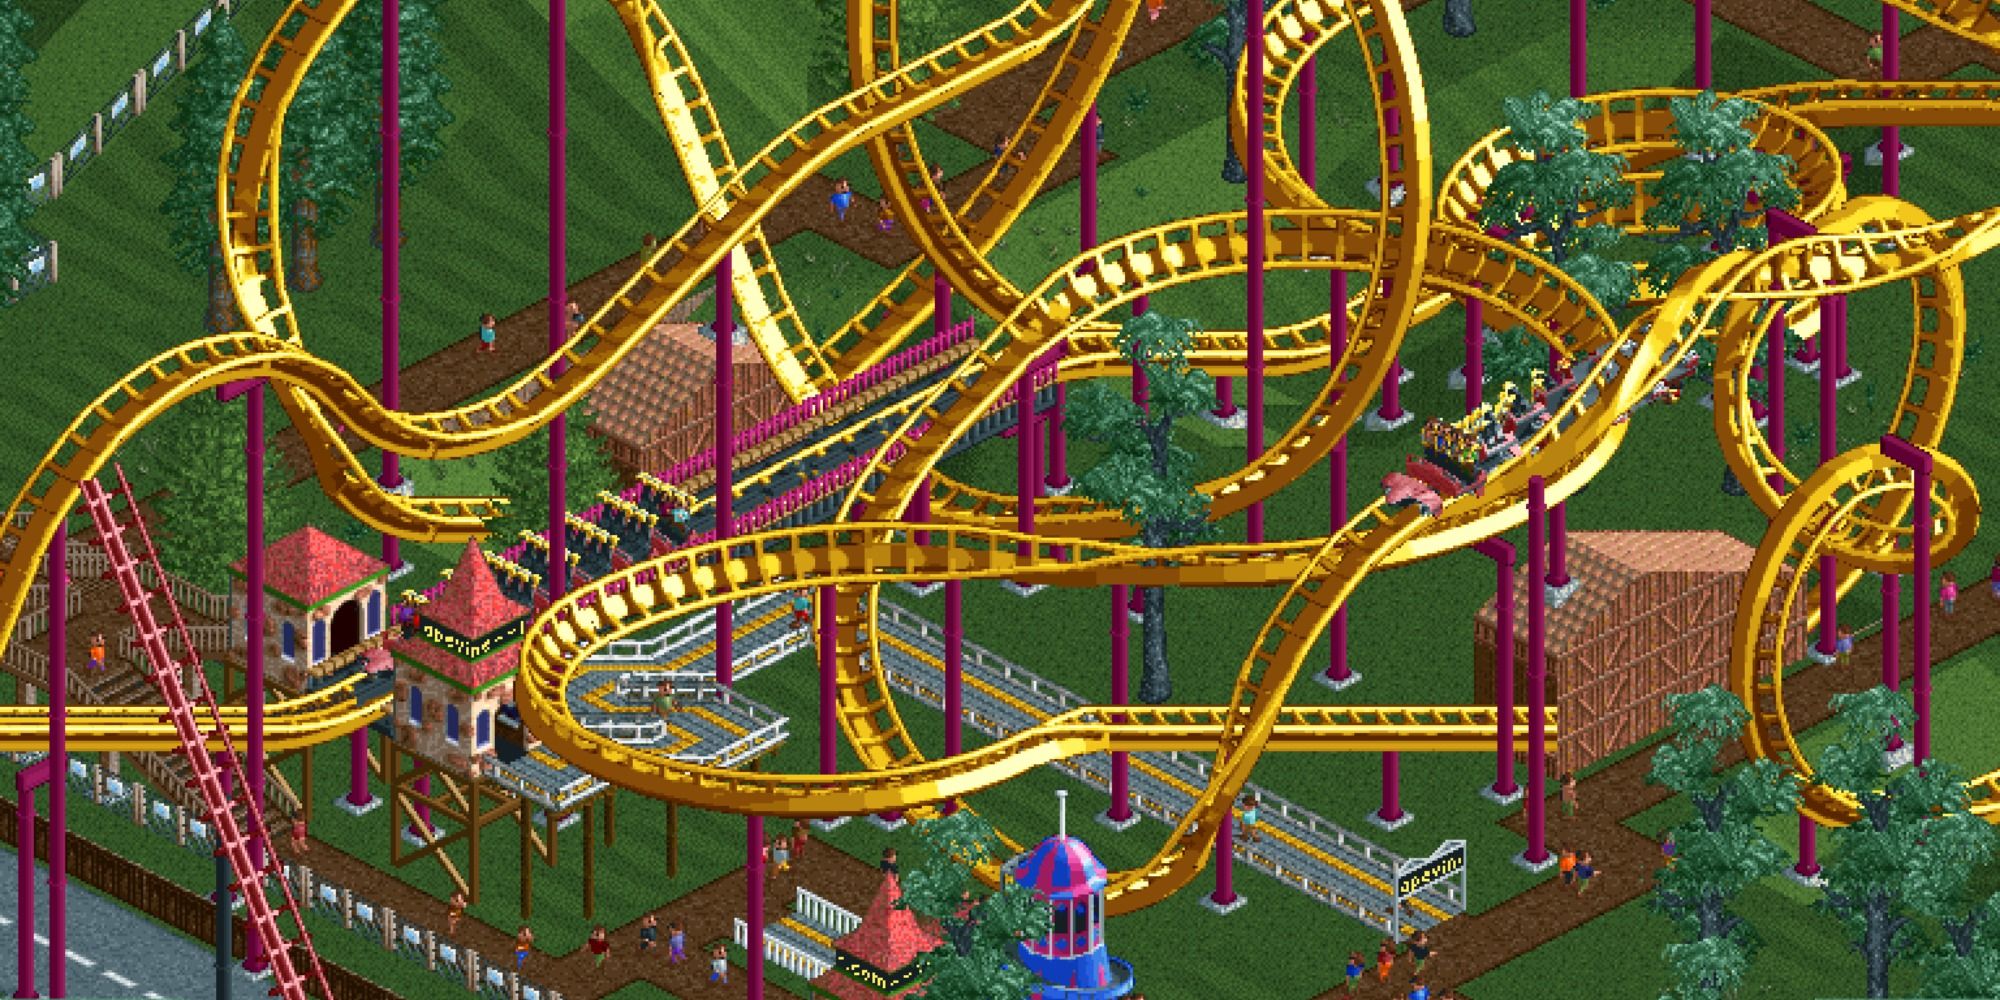 Roller Coaster Tycoon Twister coaster over a road and grass